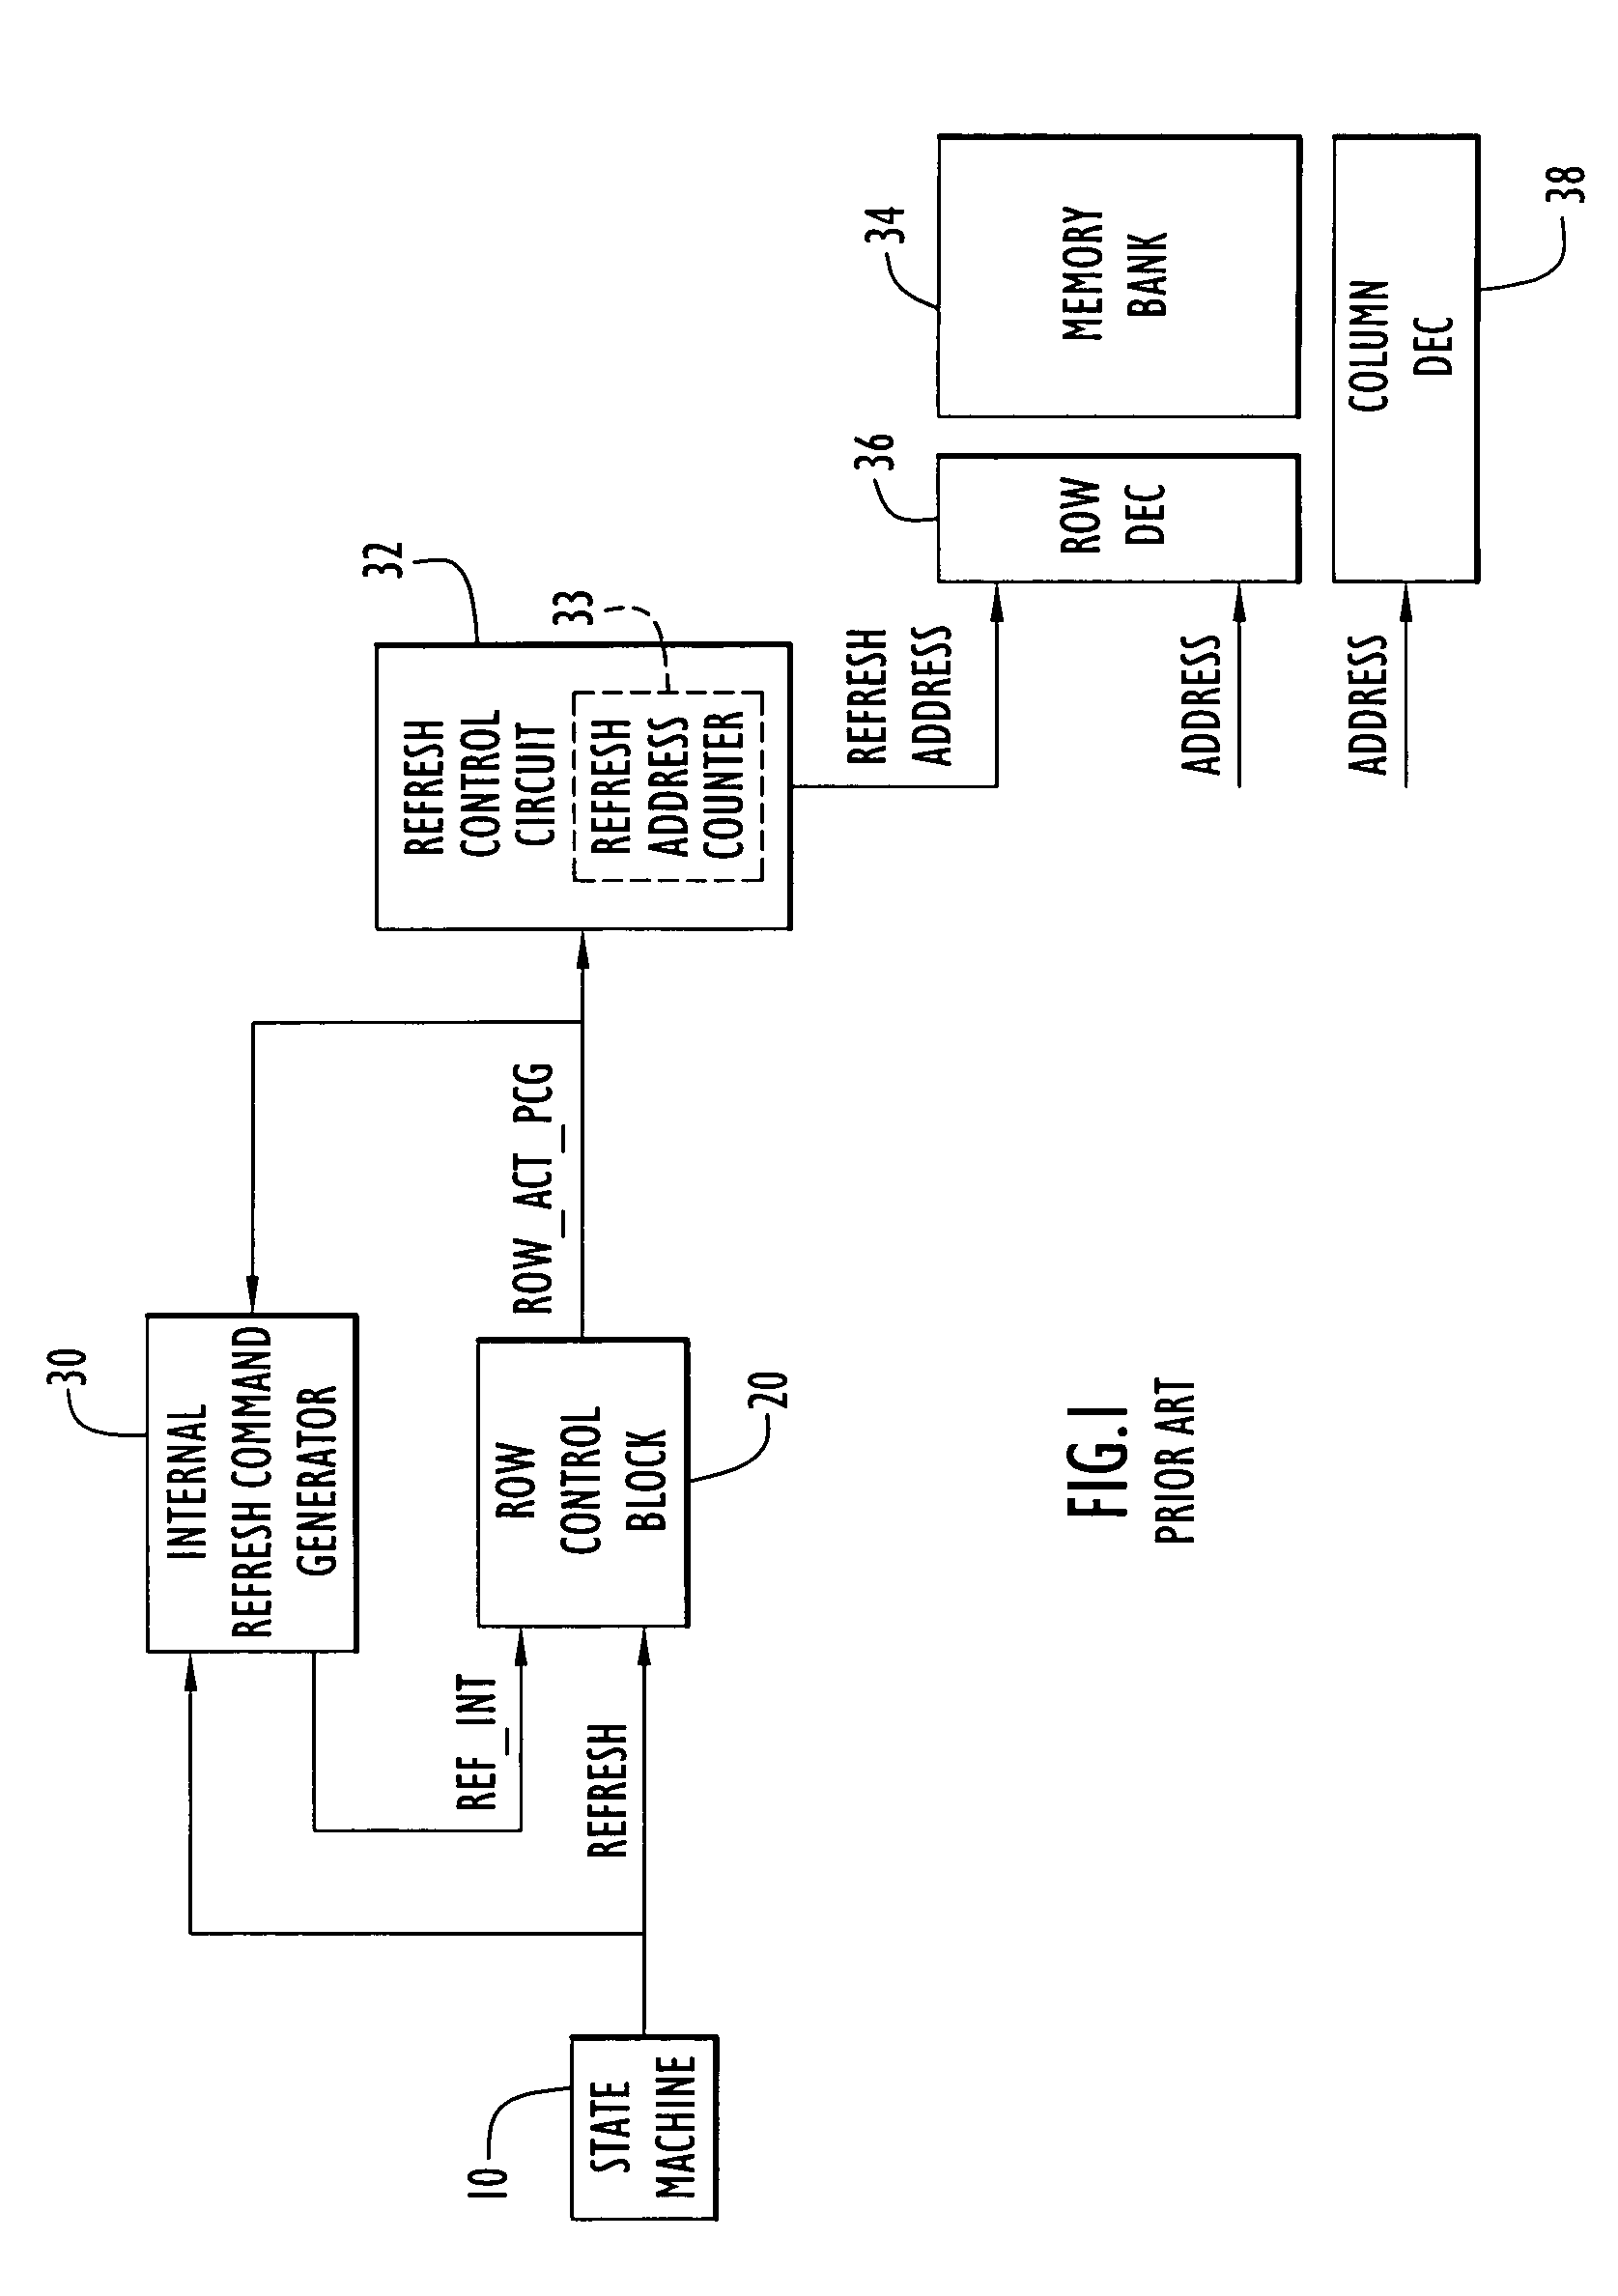 Method and apparatus for controlling refresh cycles of a plural cycle refresh scheme in a dynamic memory